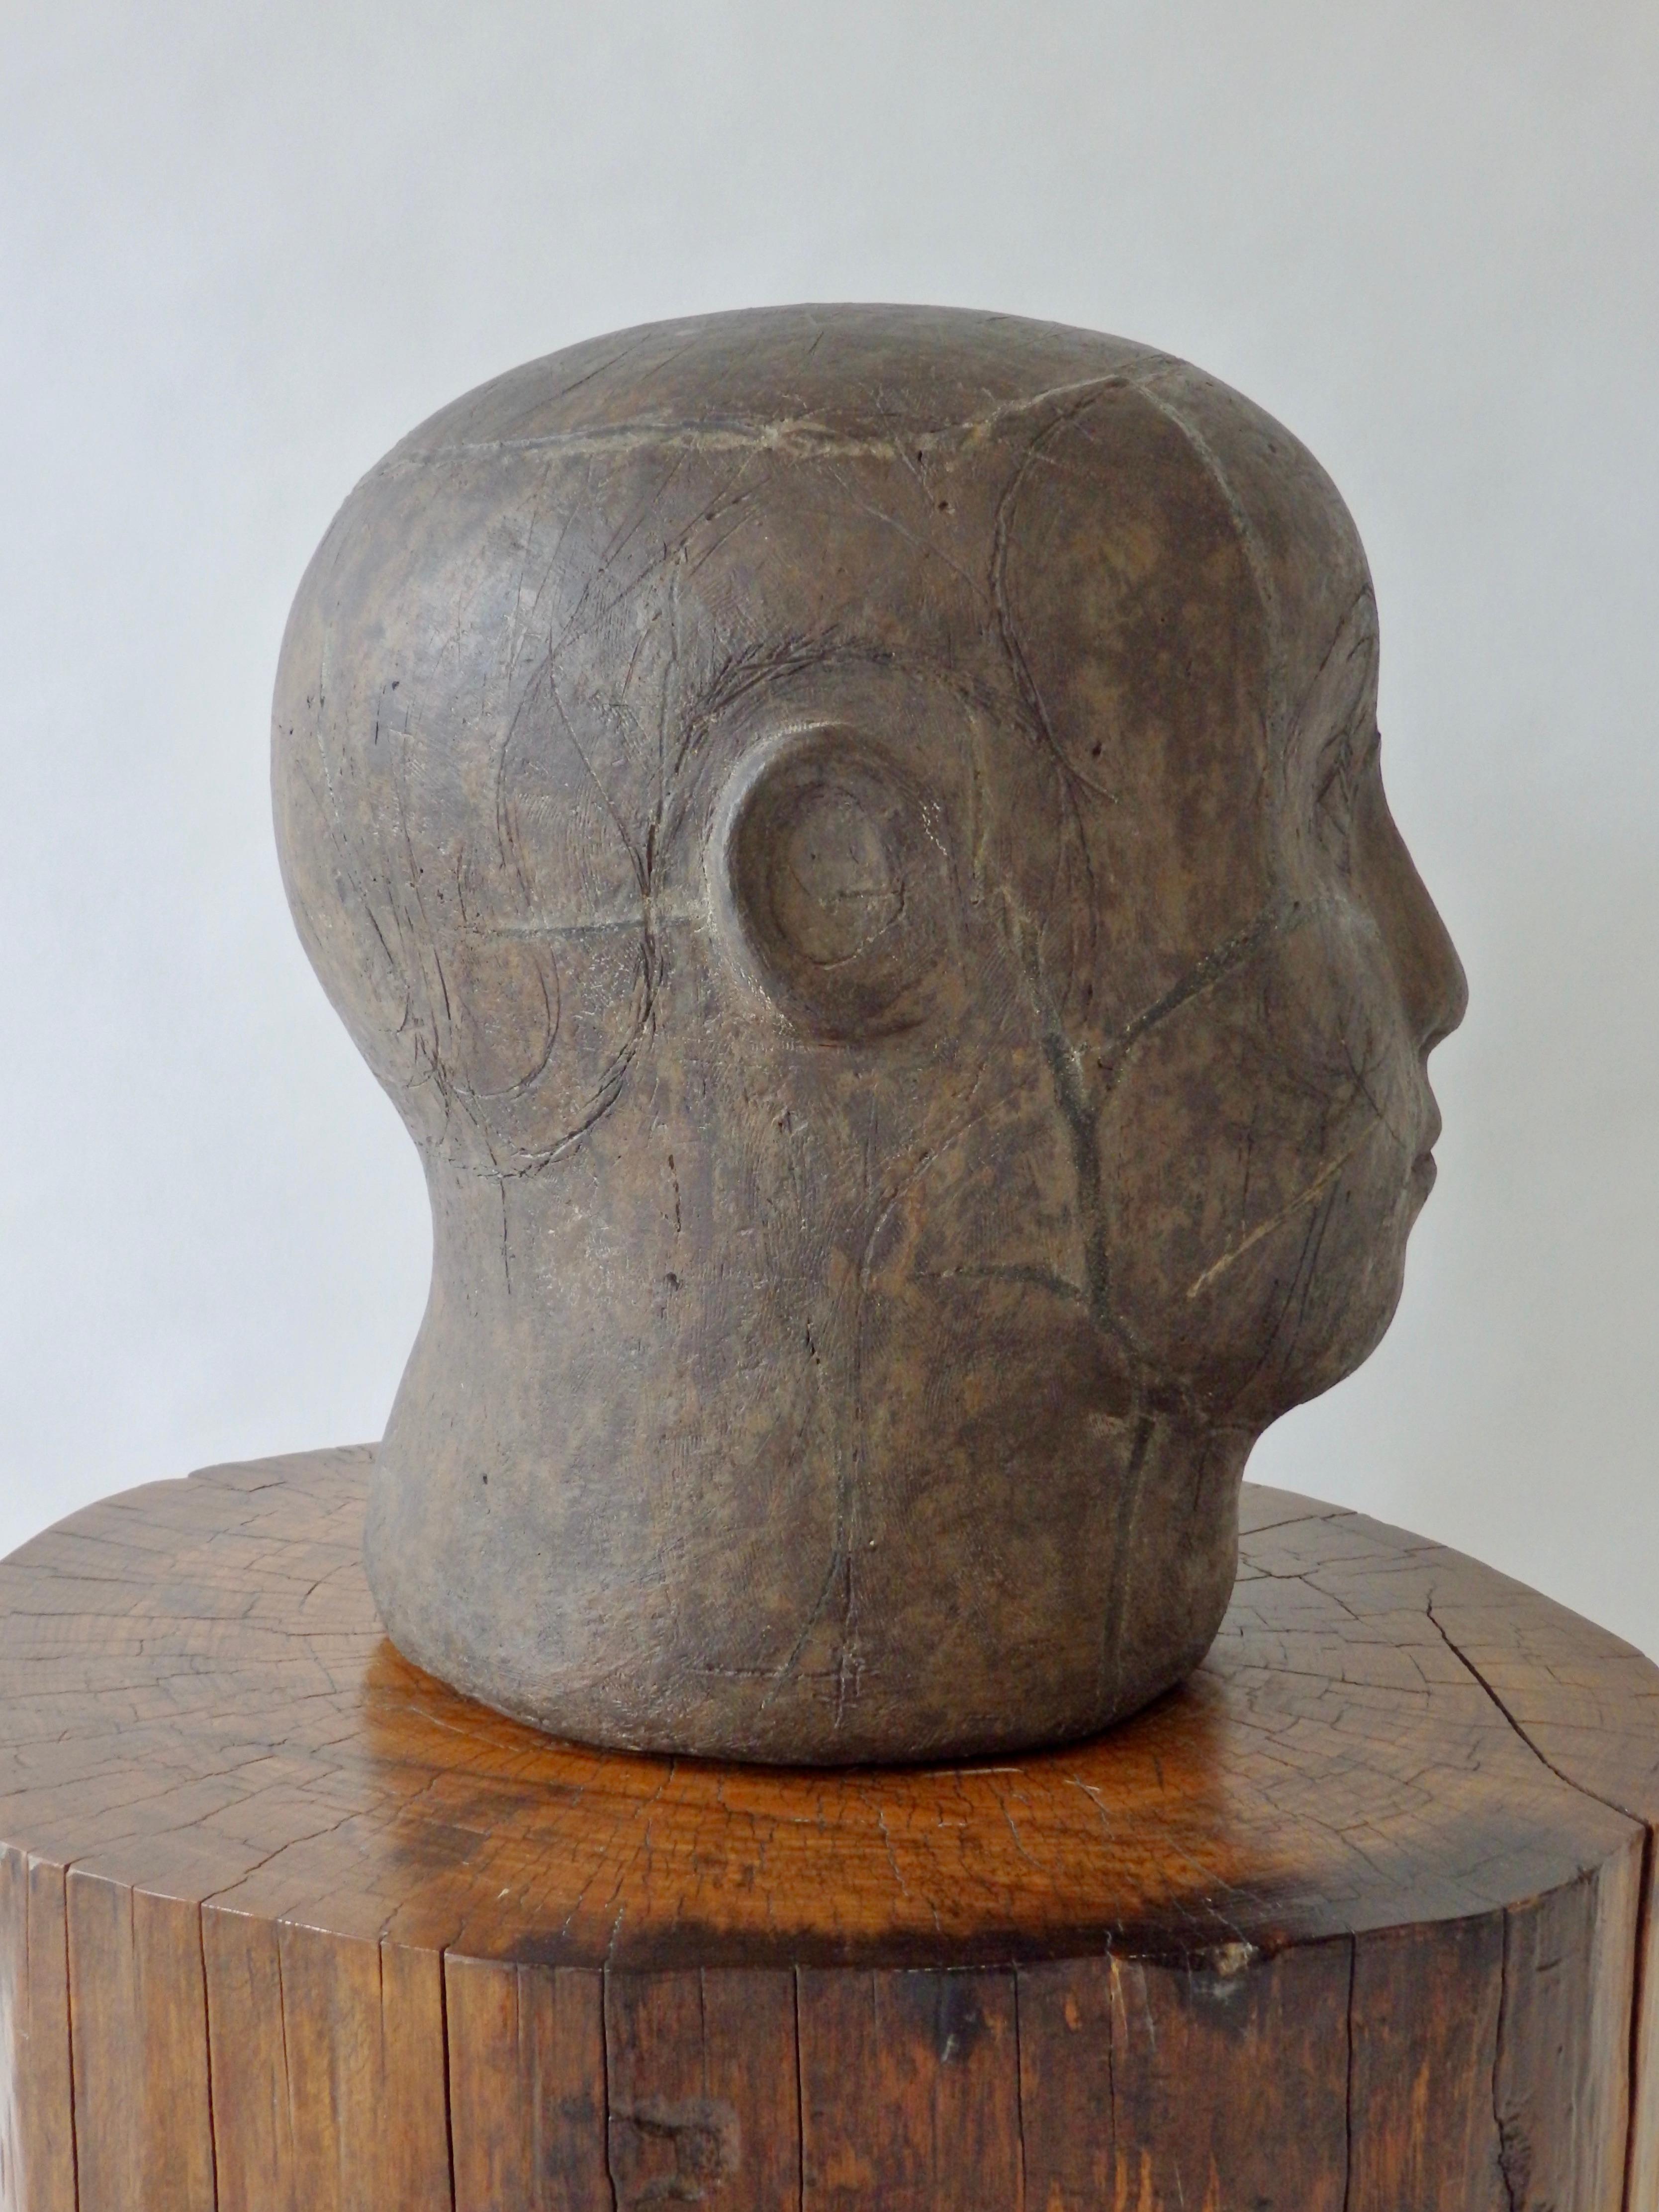 Folky stoneware sculpture of male bust. Incised mark OM 58. Believed to be O.M. Tannenbaum 1958. Hollow body still heavy.